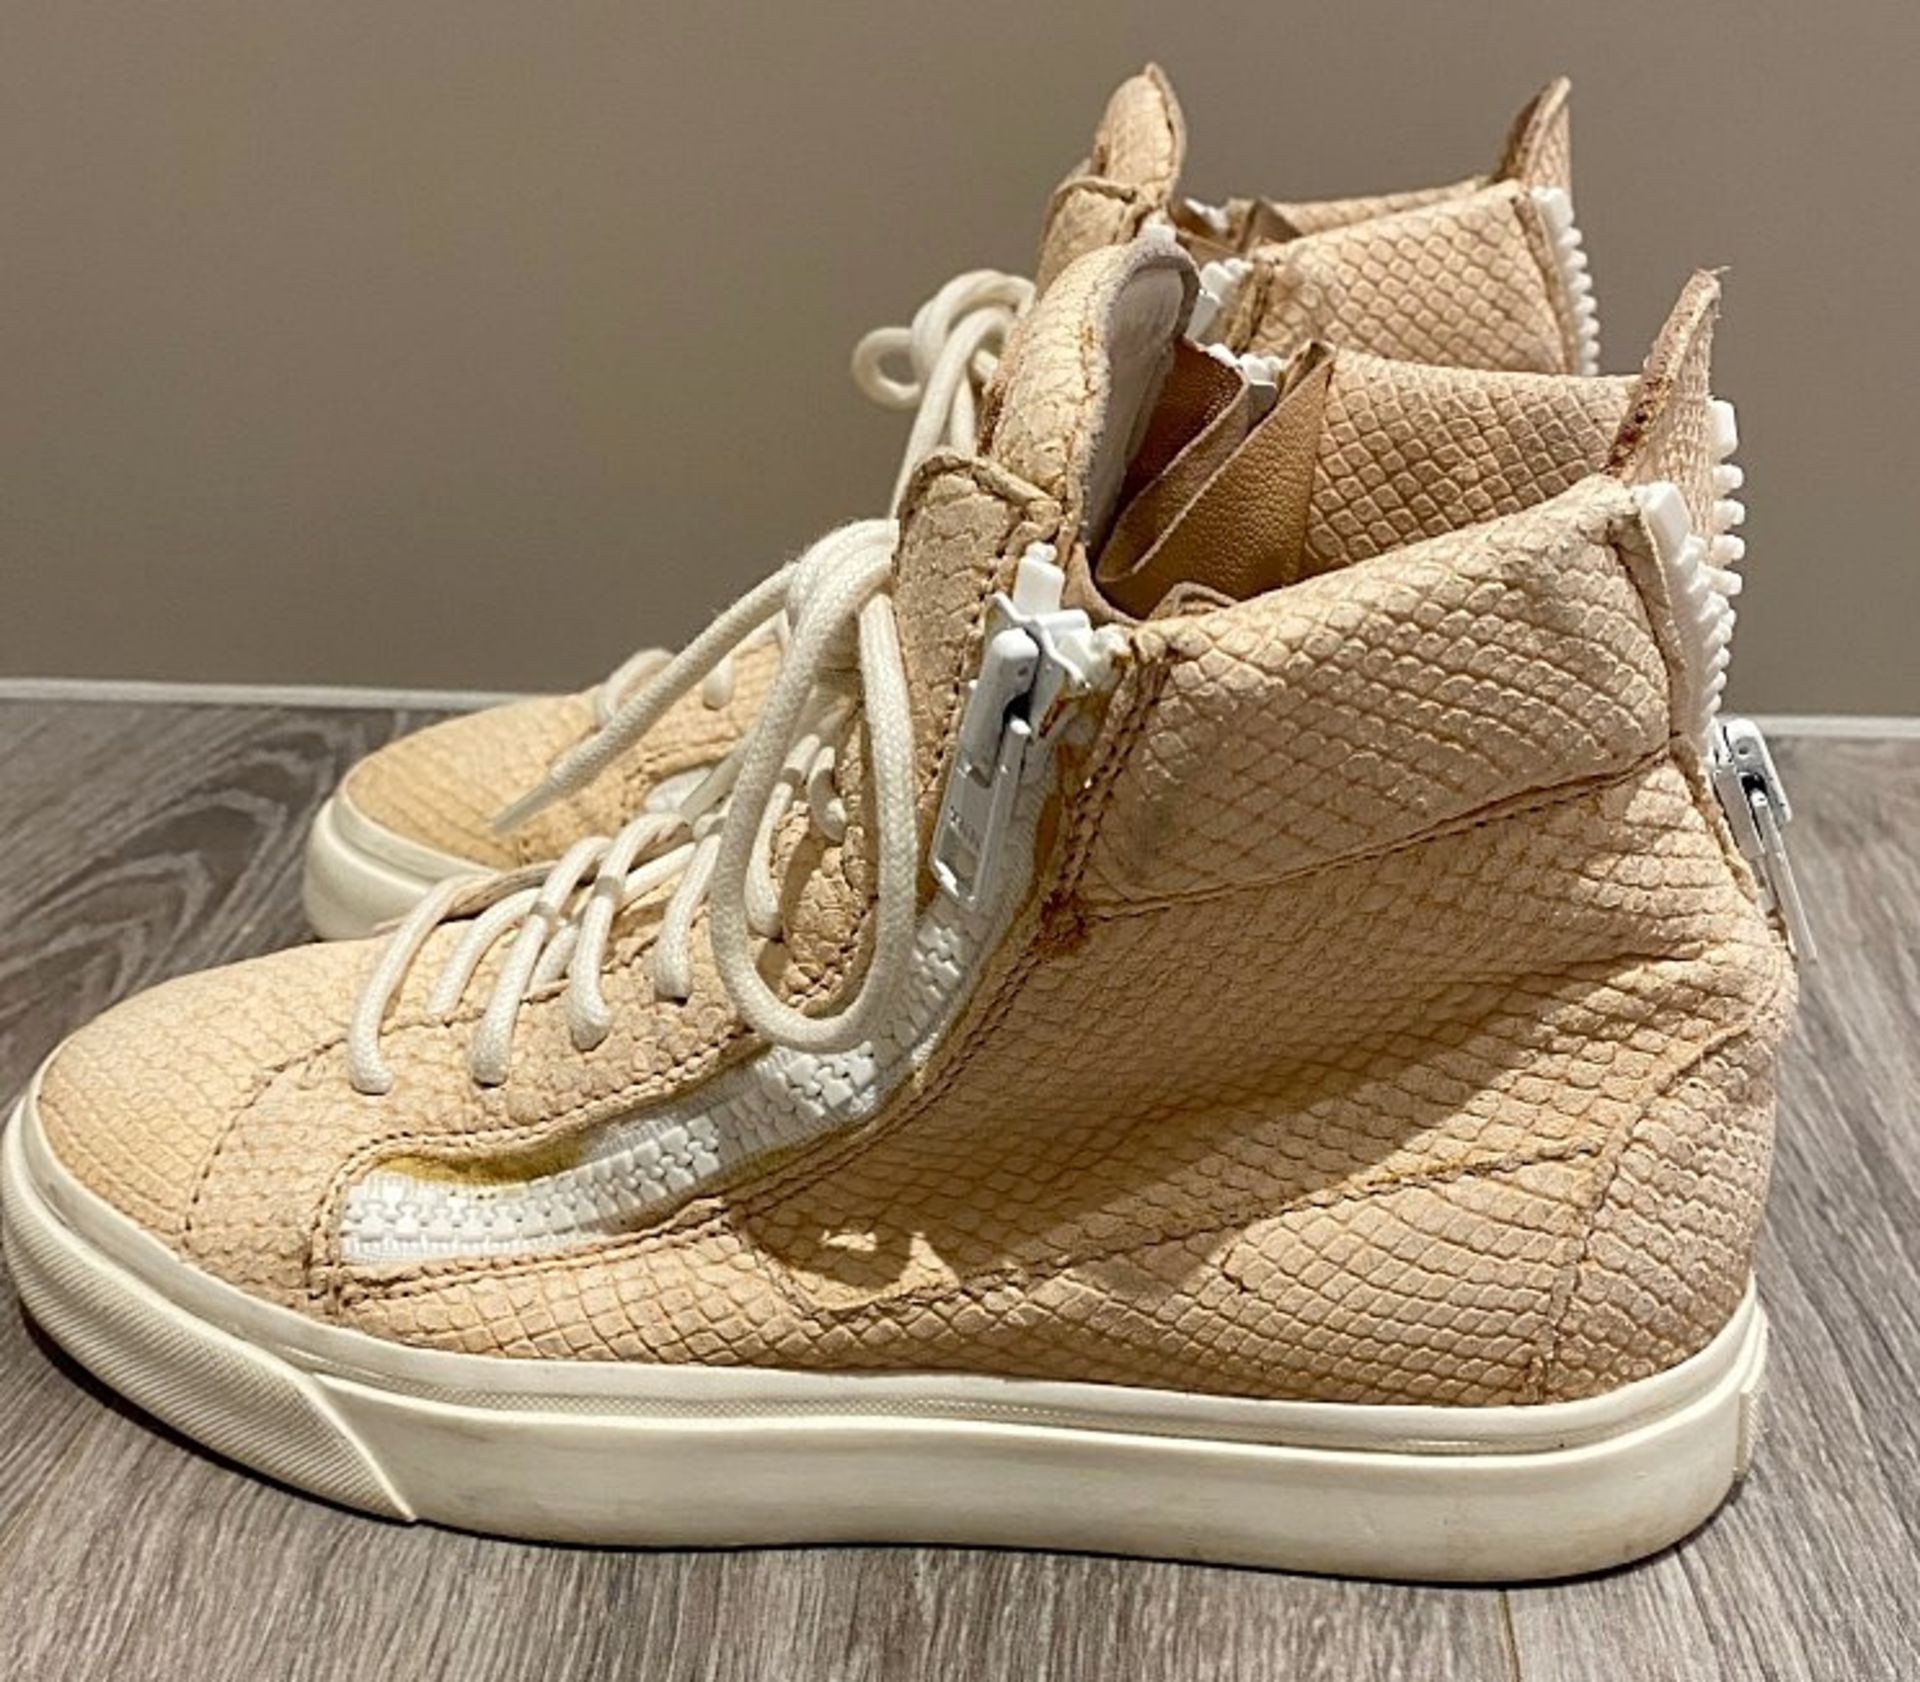 1 x Pair Of Genuine Guiseppe Zanotti Sneakers In Light Pink - Size: 36 - Preowned in Worn Condition - Image 3 of 6